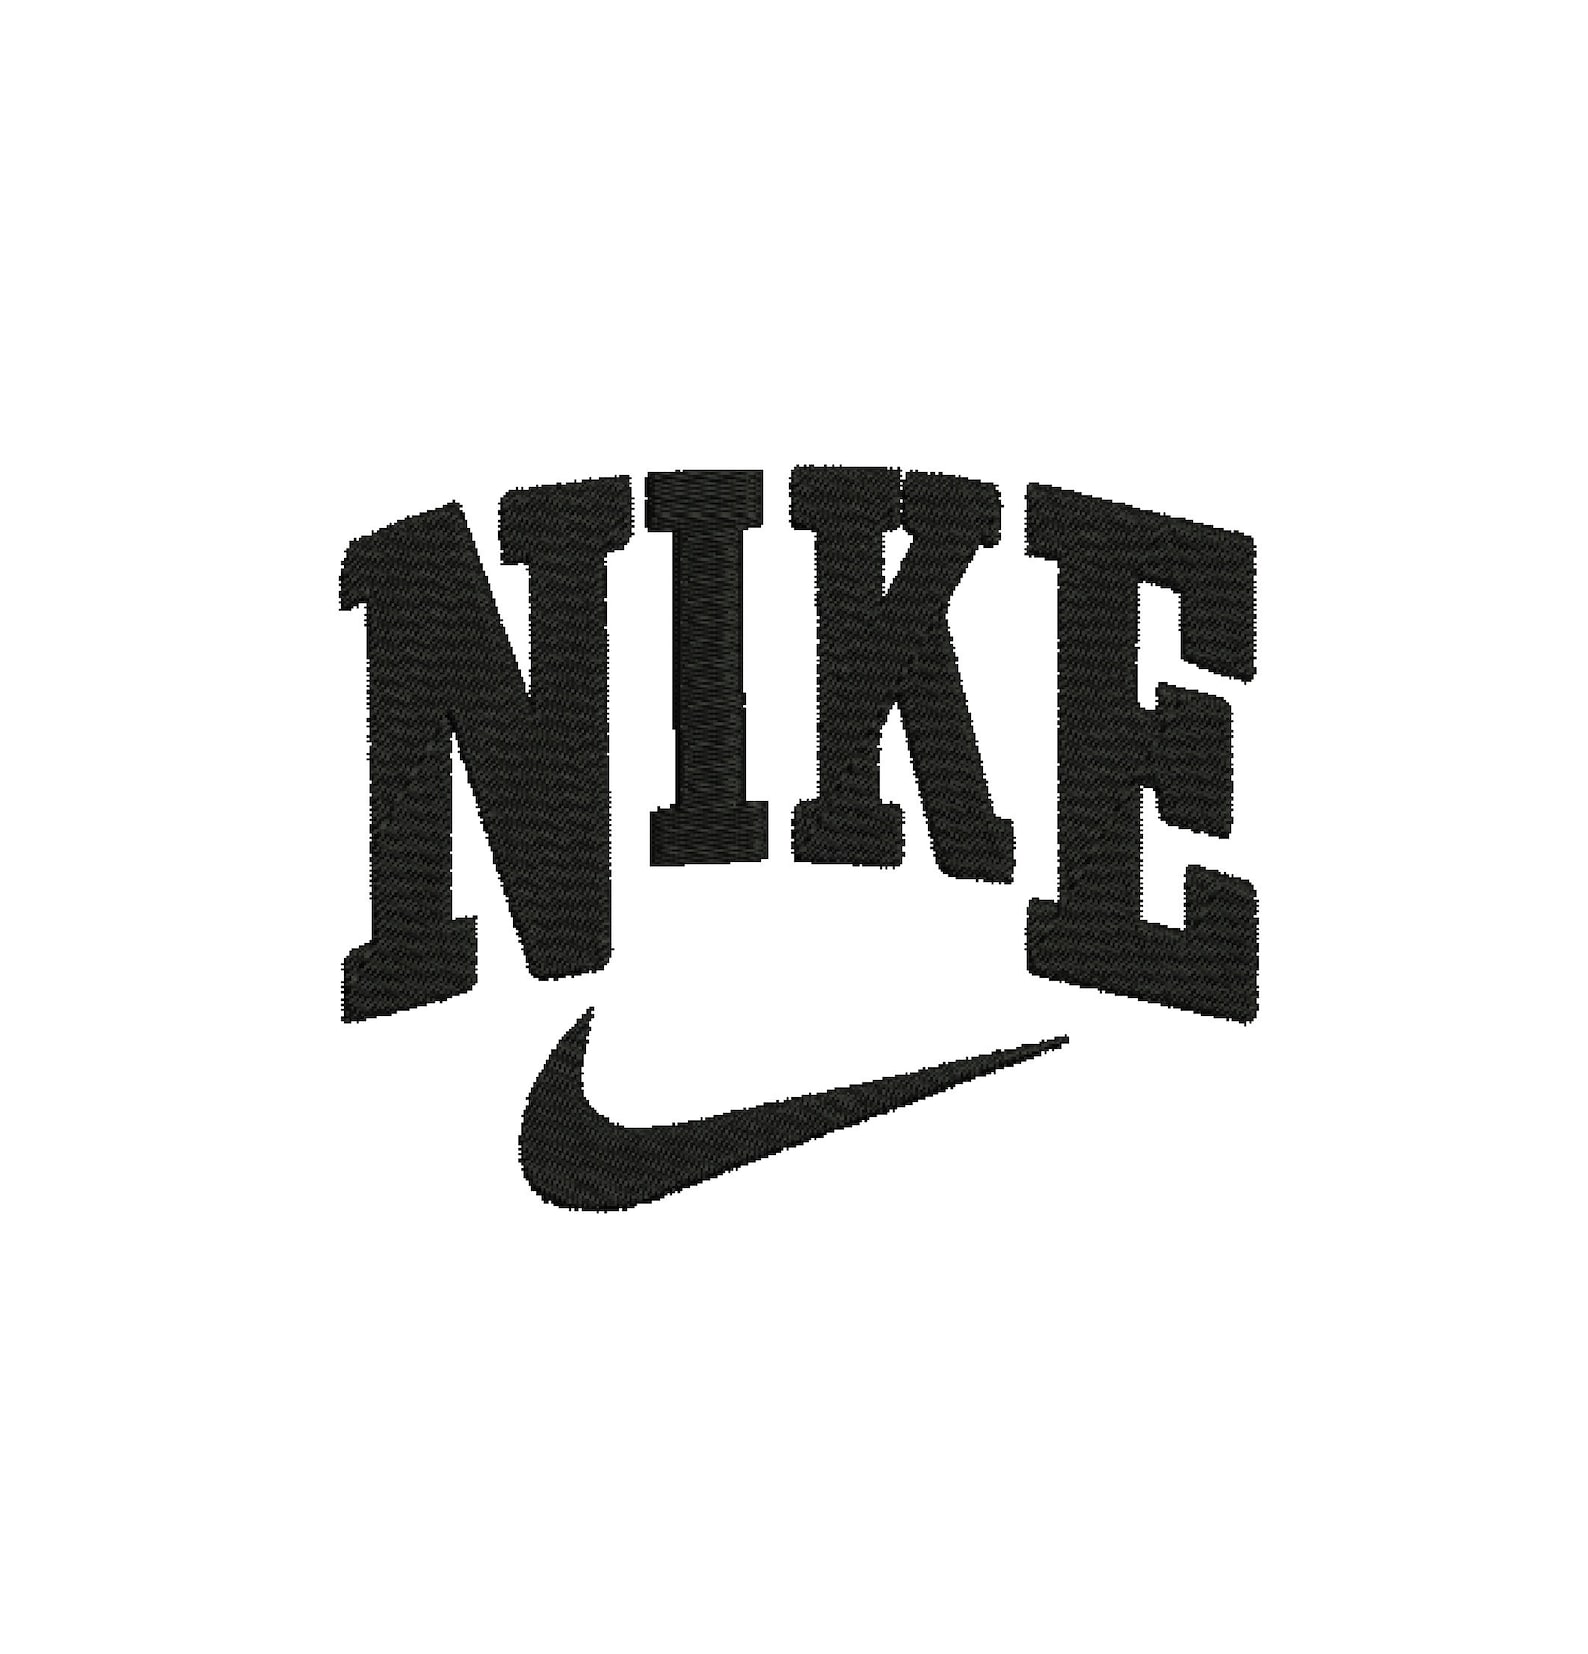 Nike Embroidery Machine Patterns Design embroidery | Etsy